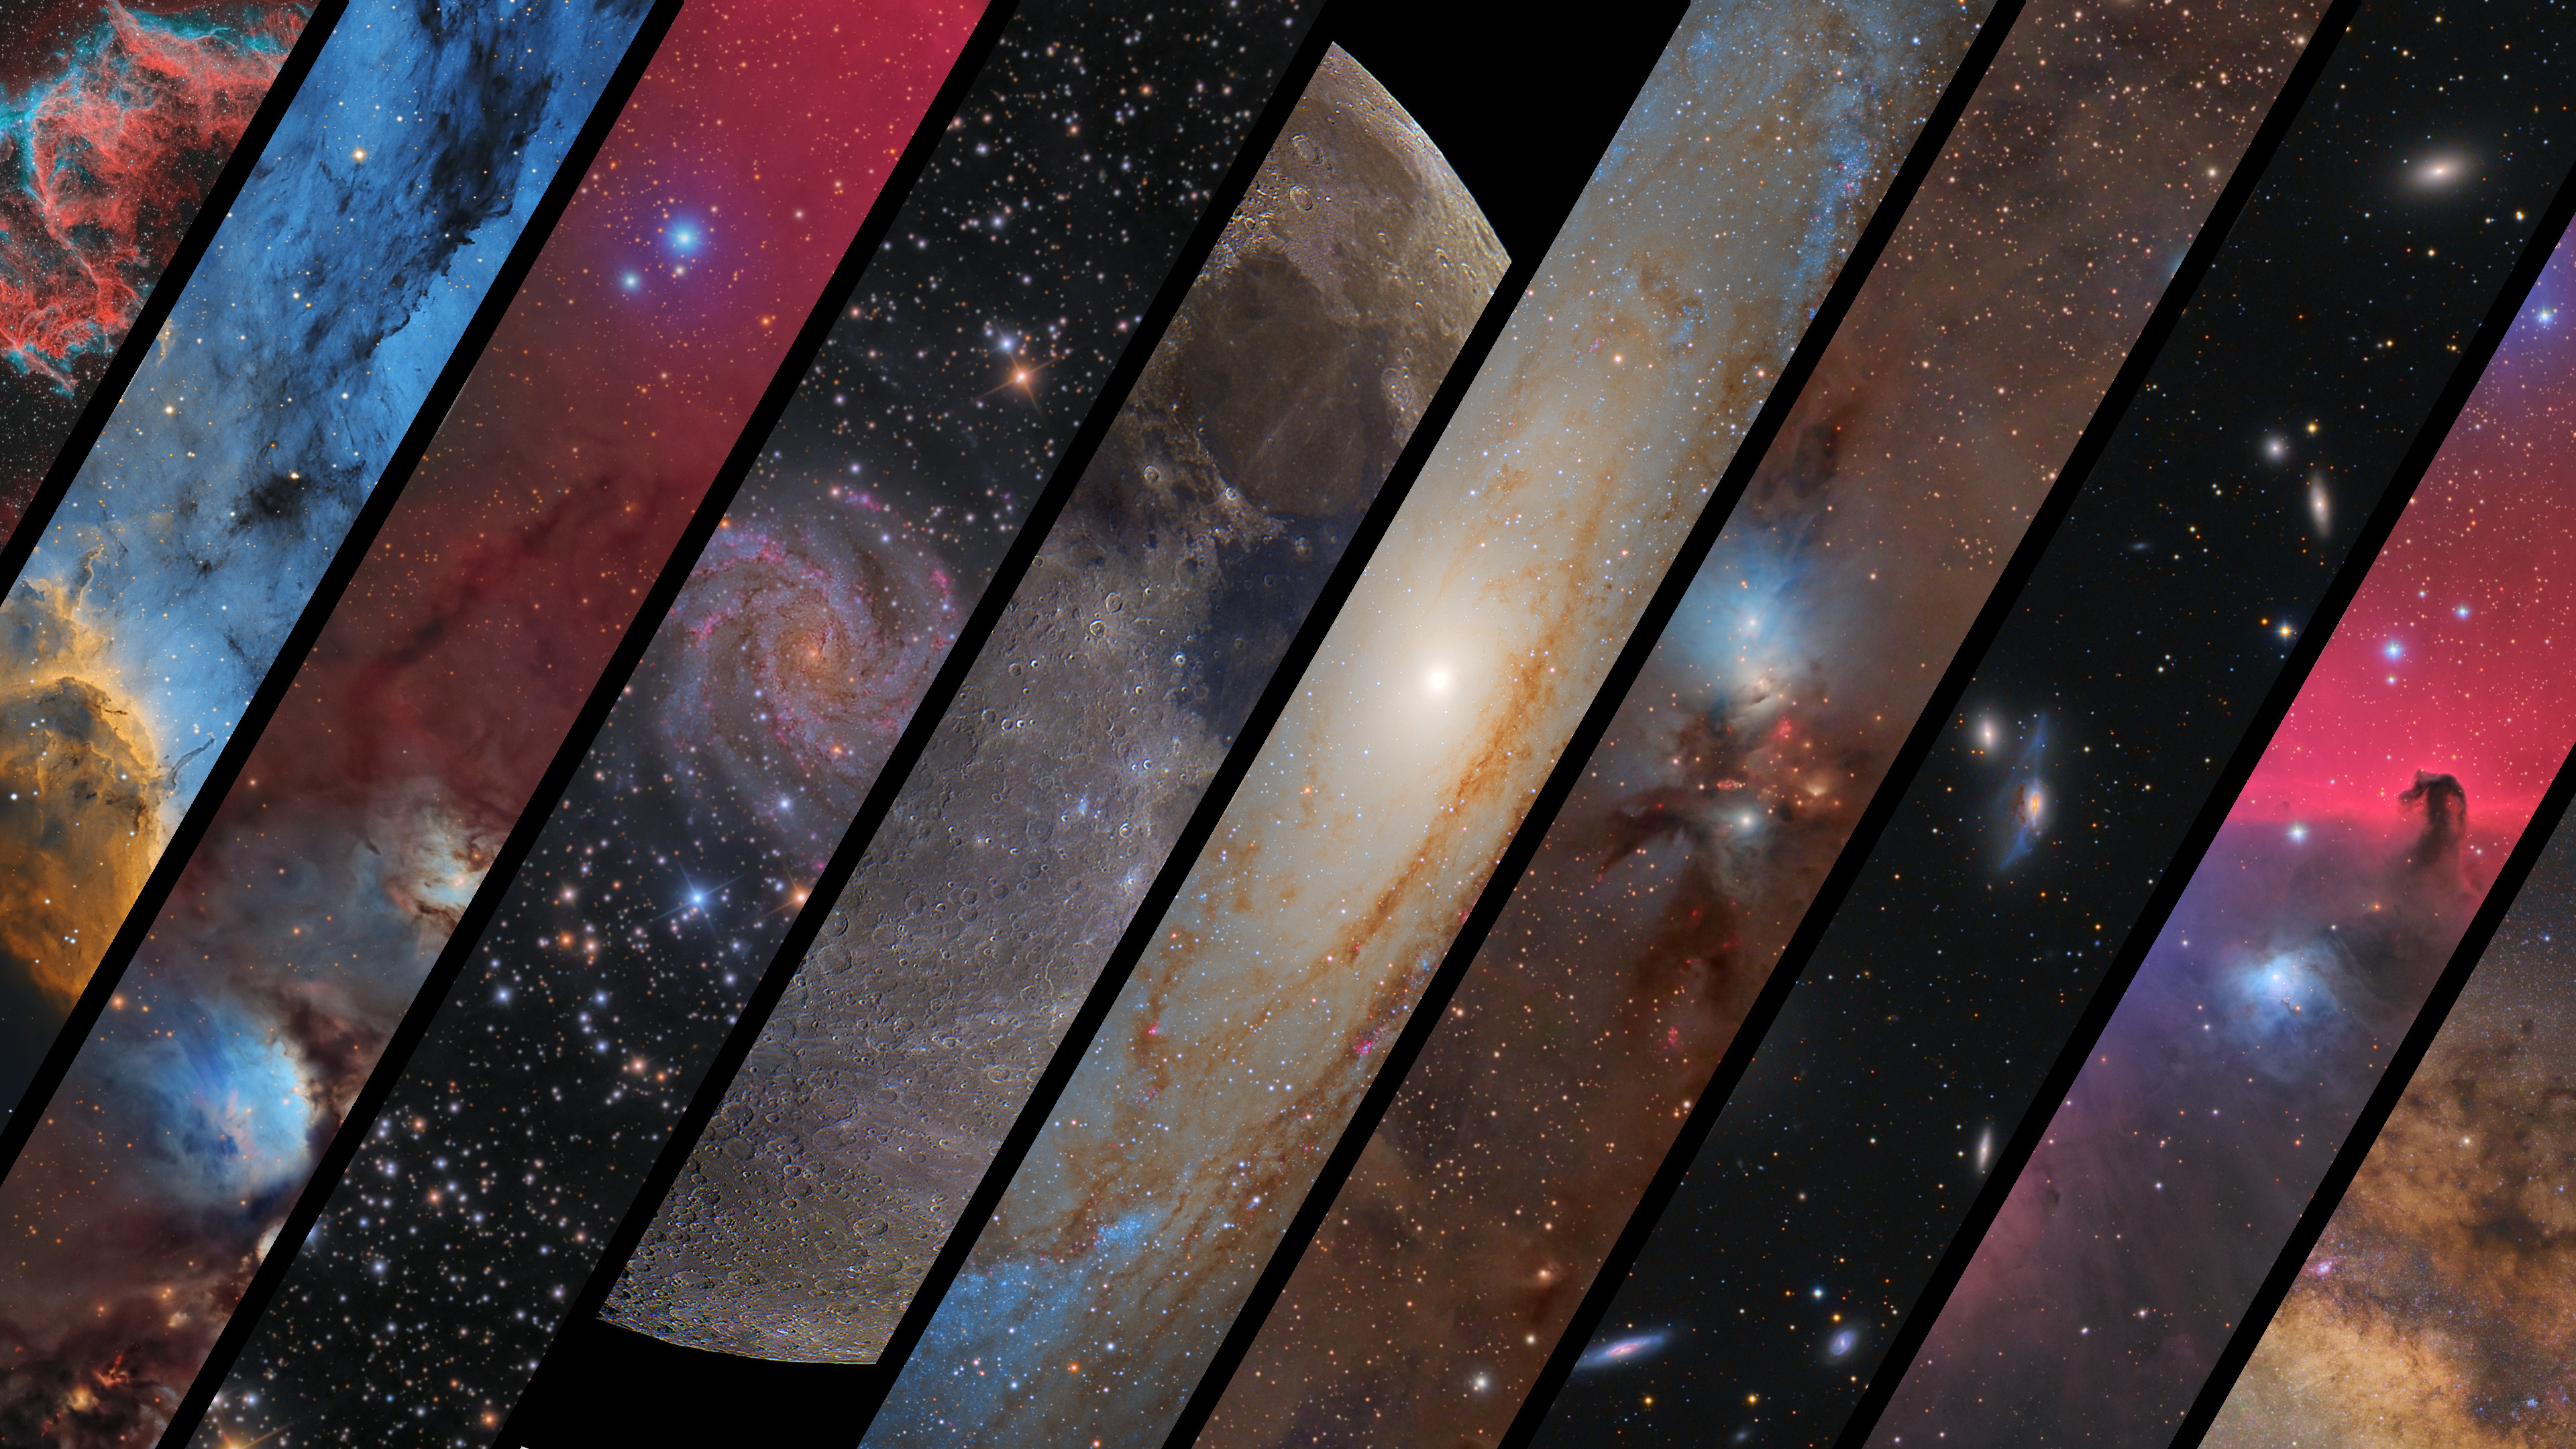 I made a 4k wallpaper consisting of my favorite astronomy imagers